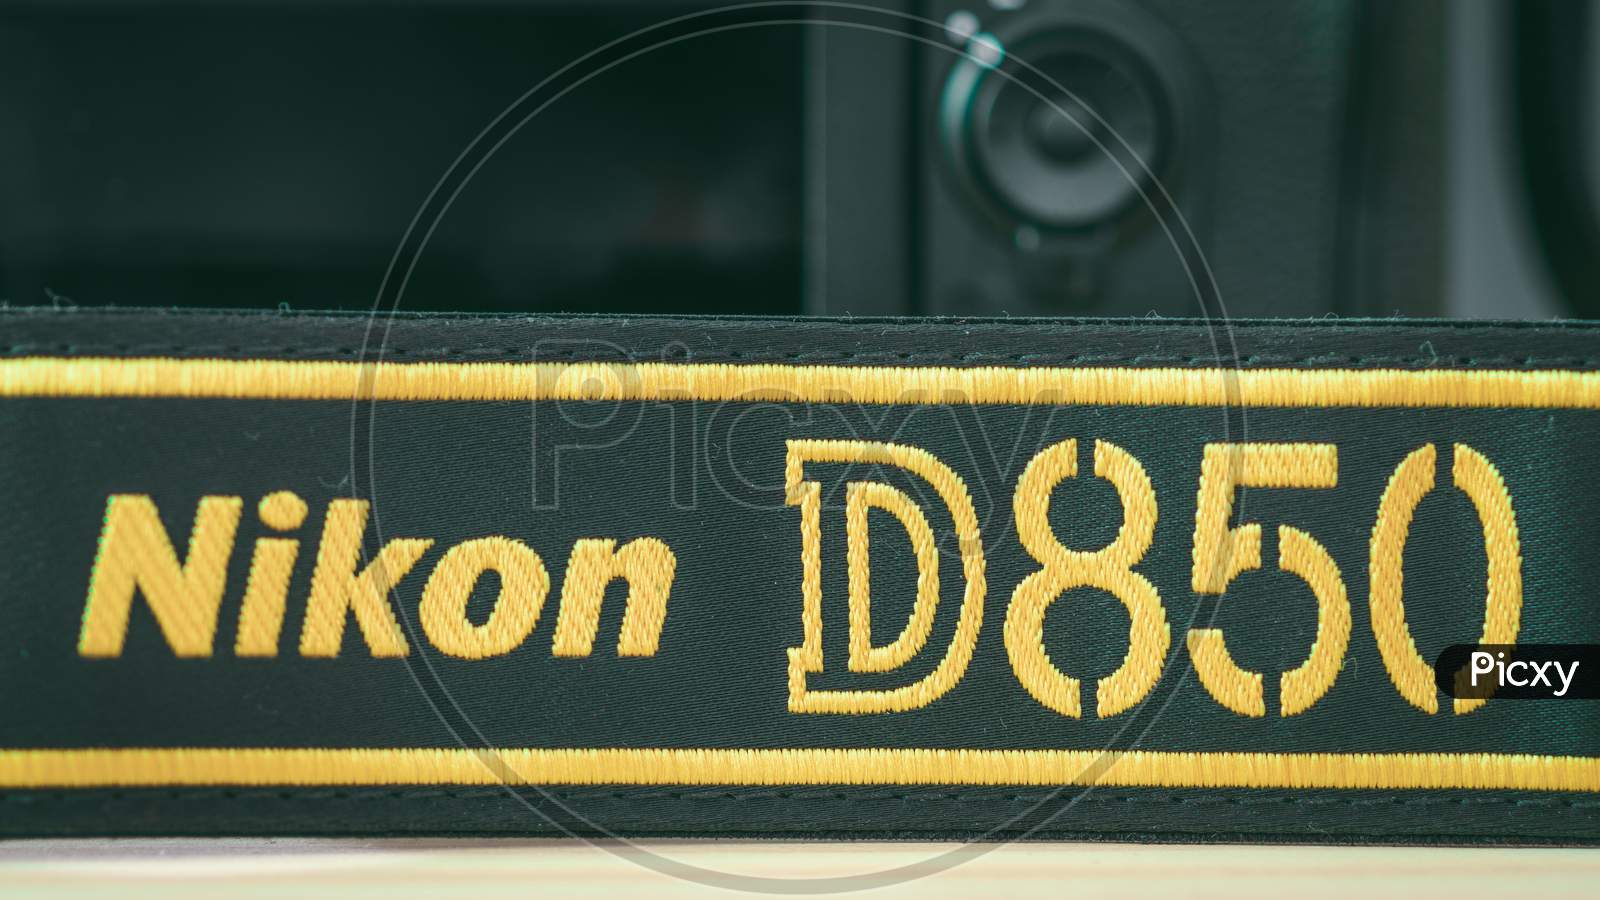 Galle, Sri Lanka - 02 17 2021: Nikon D850 Dslr And Camera Strap On Wooden Table Close Up, Brand New Nikon Logo Embroidered In Yellow Into A Black Ribbon, Professional Factory Finishing Product.